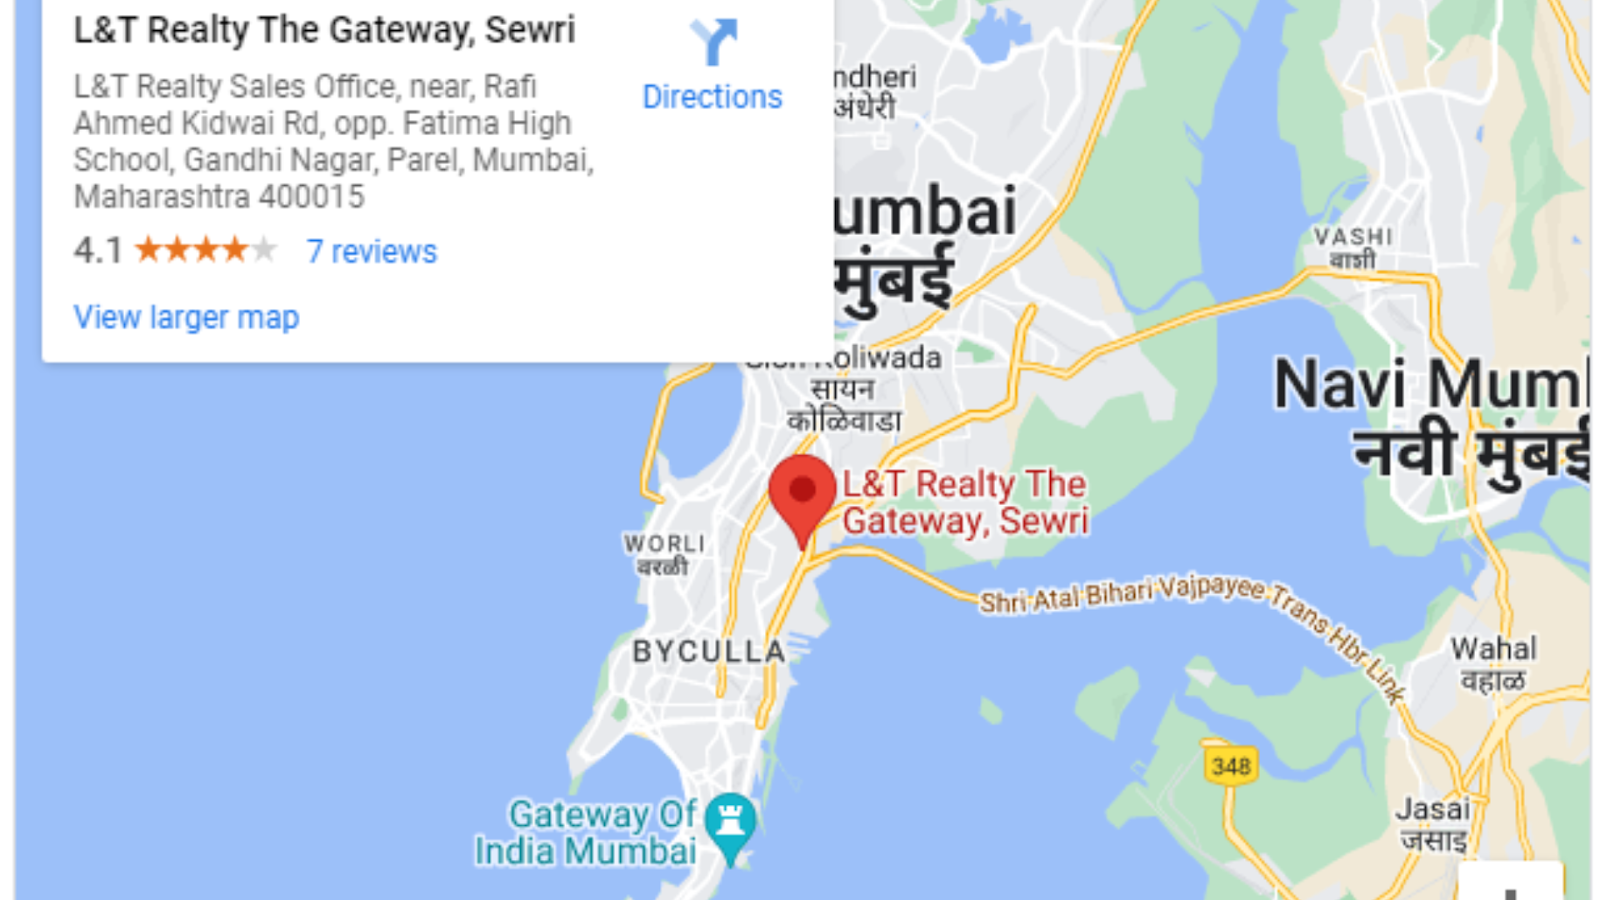 The best location for your luxury lifestyle and best for your future will be The Gateway Sewri.